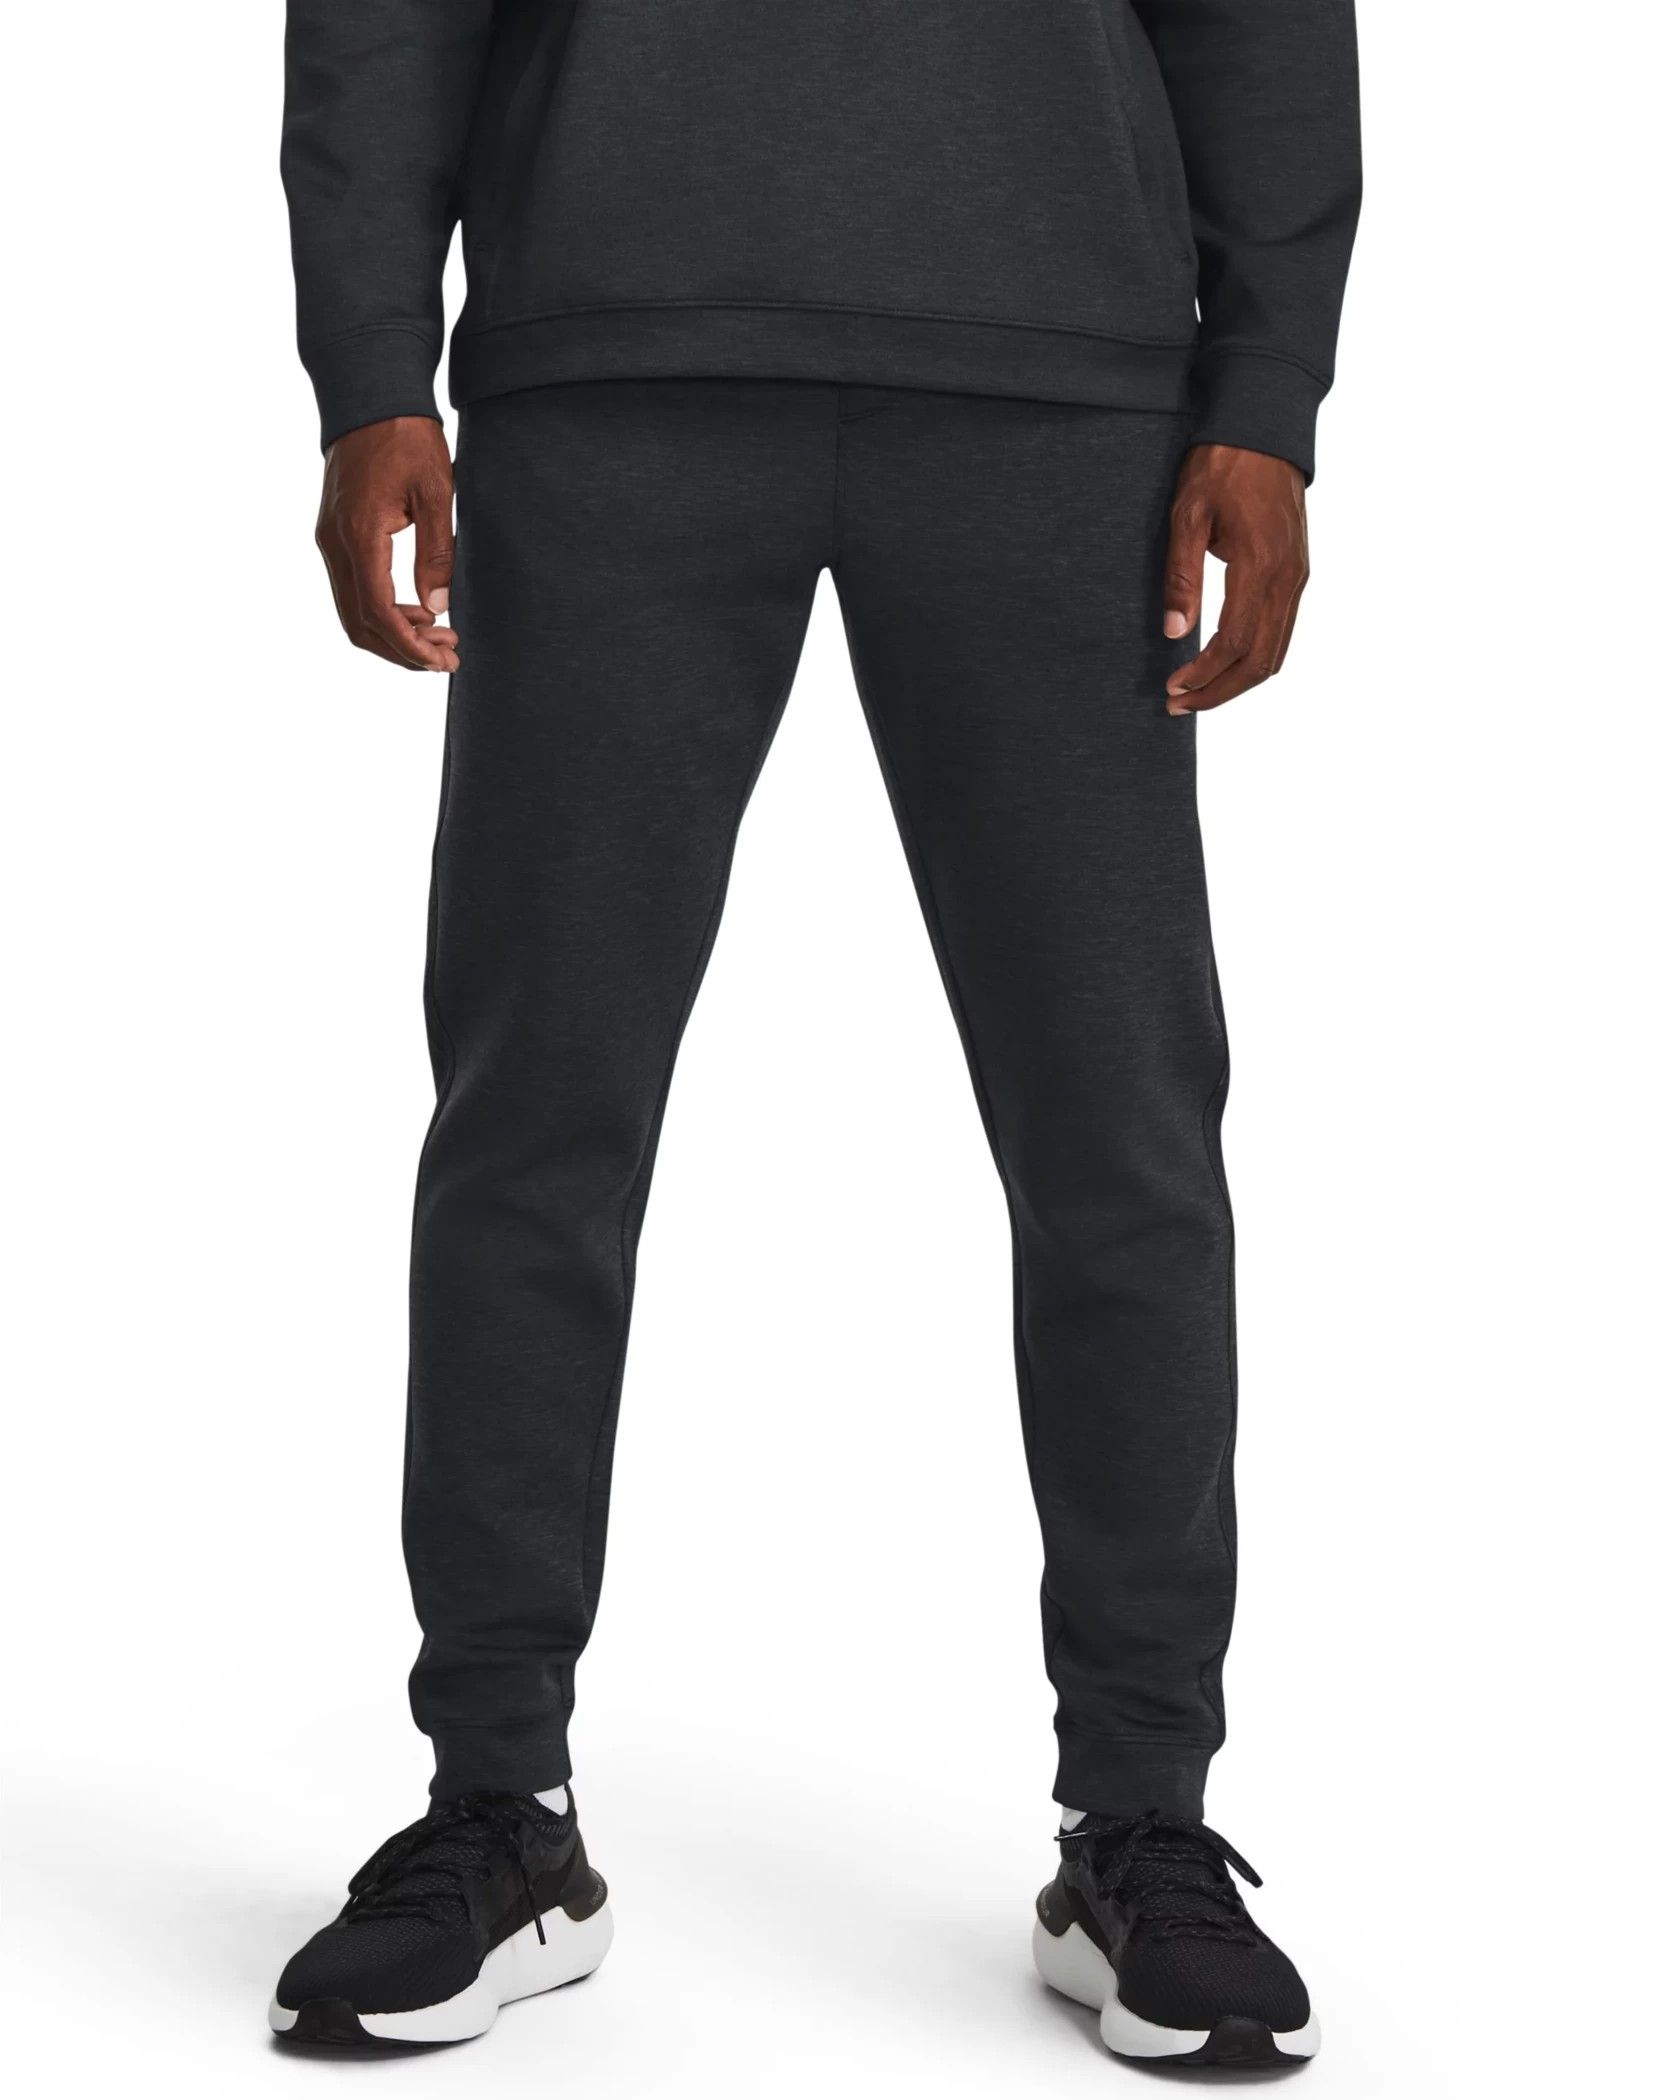 Buy Under Armour Meridian Cold Weather JoggersPant-Grey online